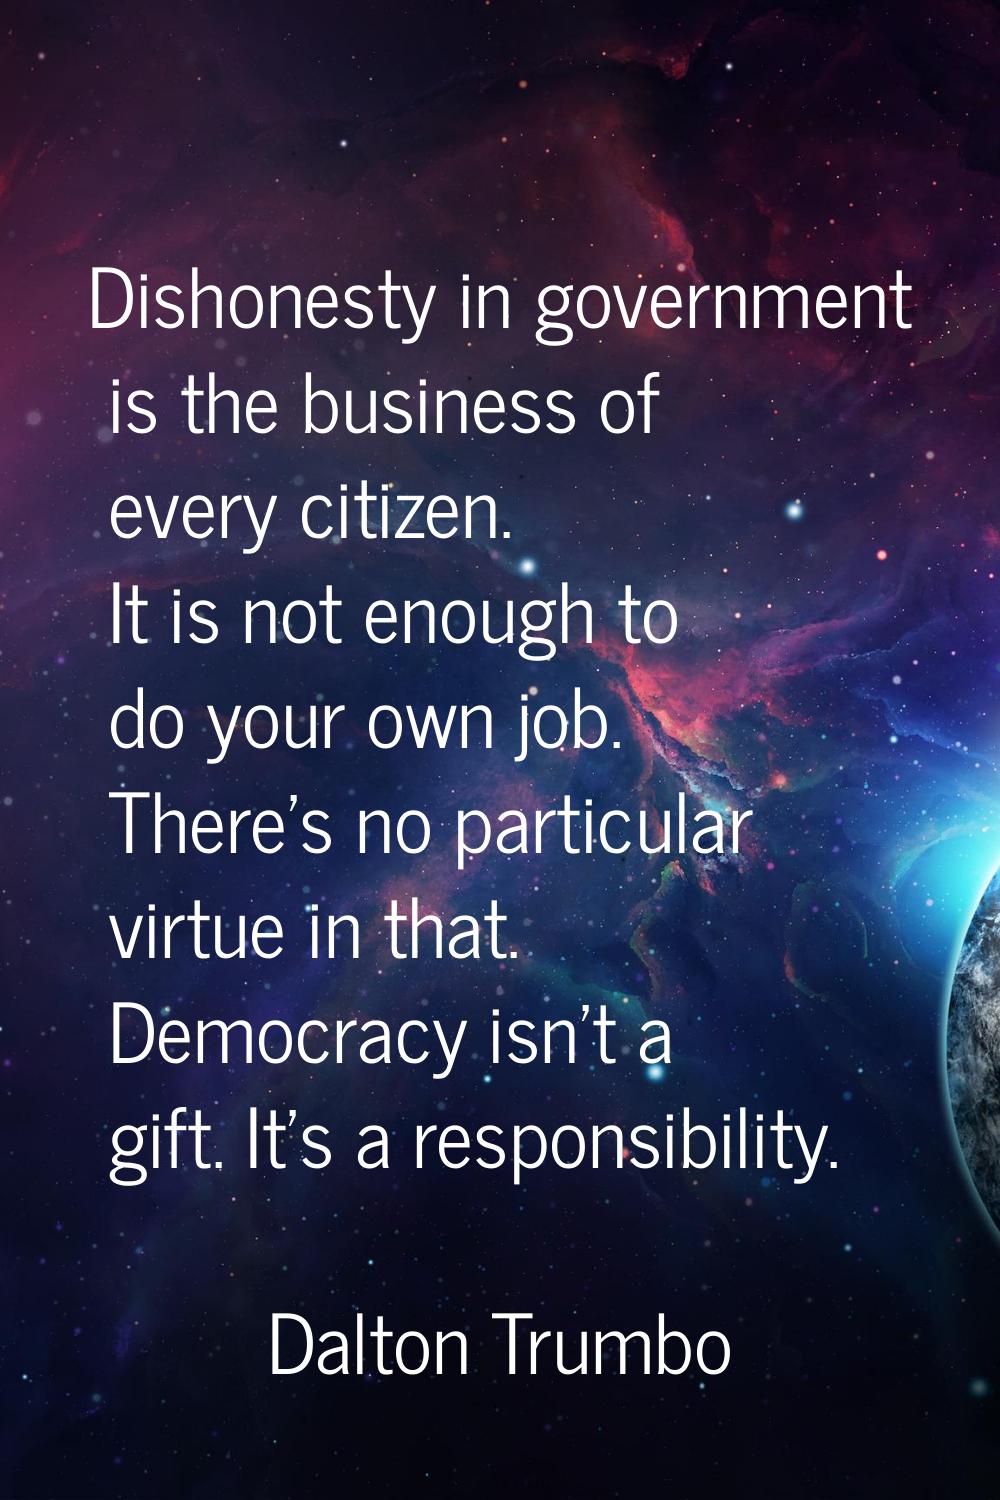 Dishonesty in government is the business of every citizen. It is not enough to do your own job. The